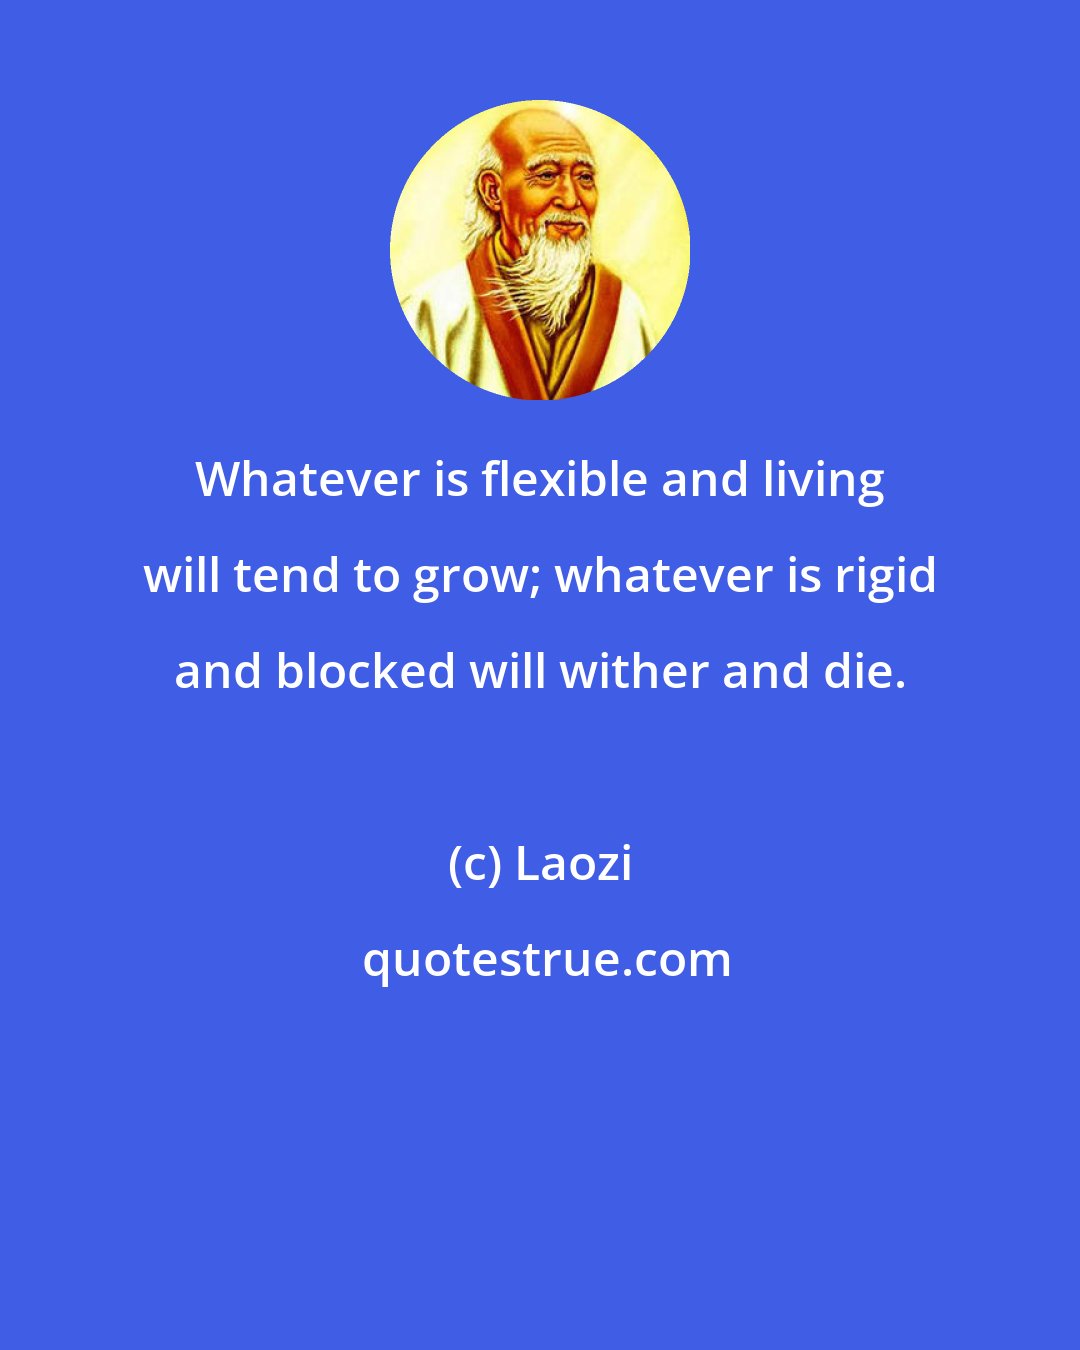 Laozi: Whatever is flexible and living will tend to grow; whatever is rigid and blocked will wither and die.